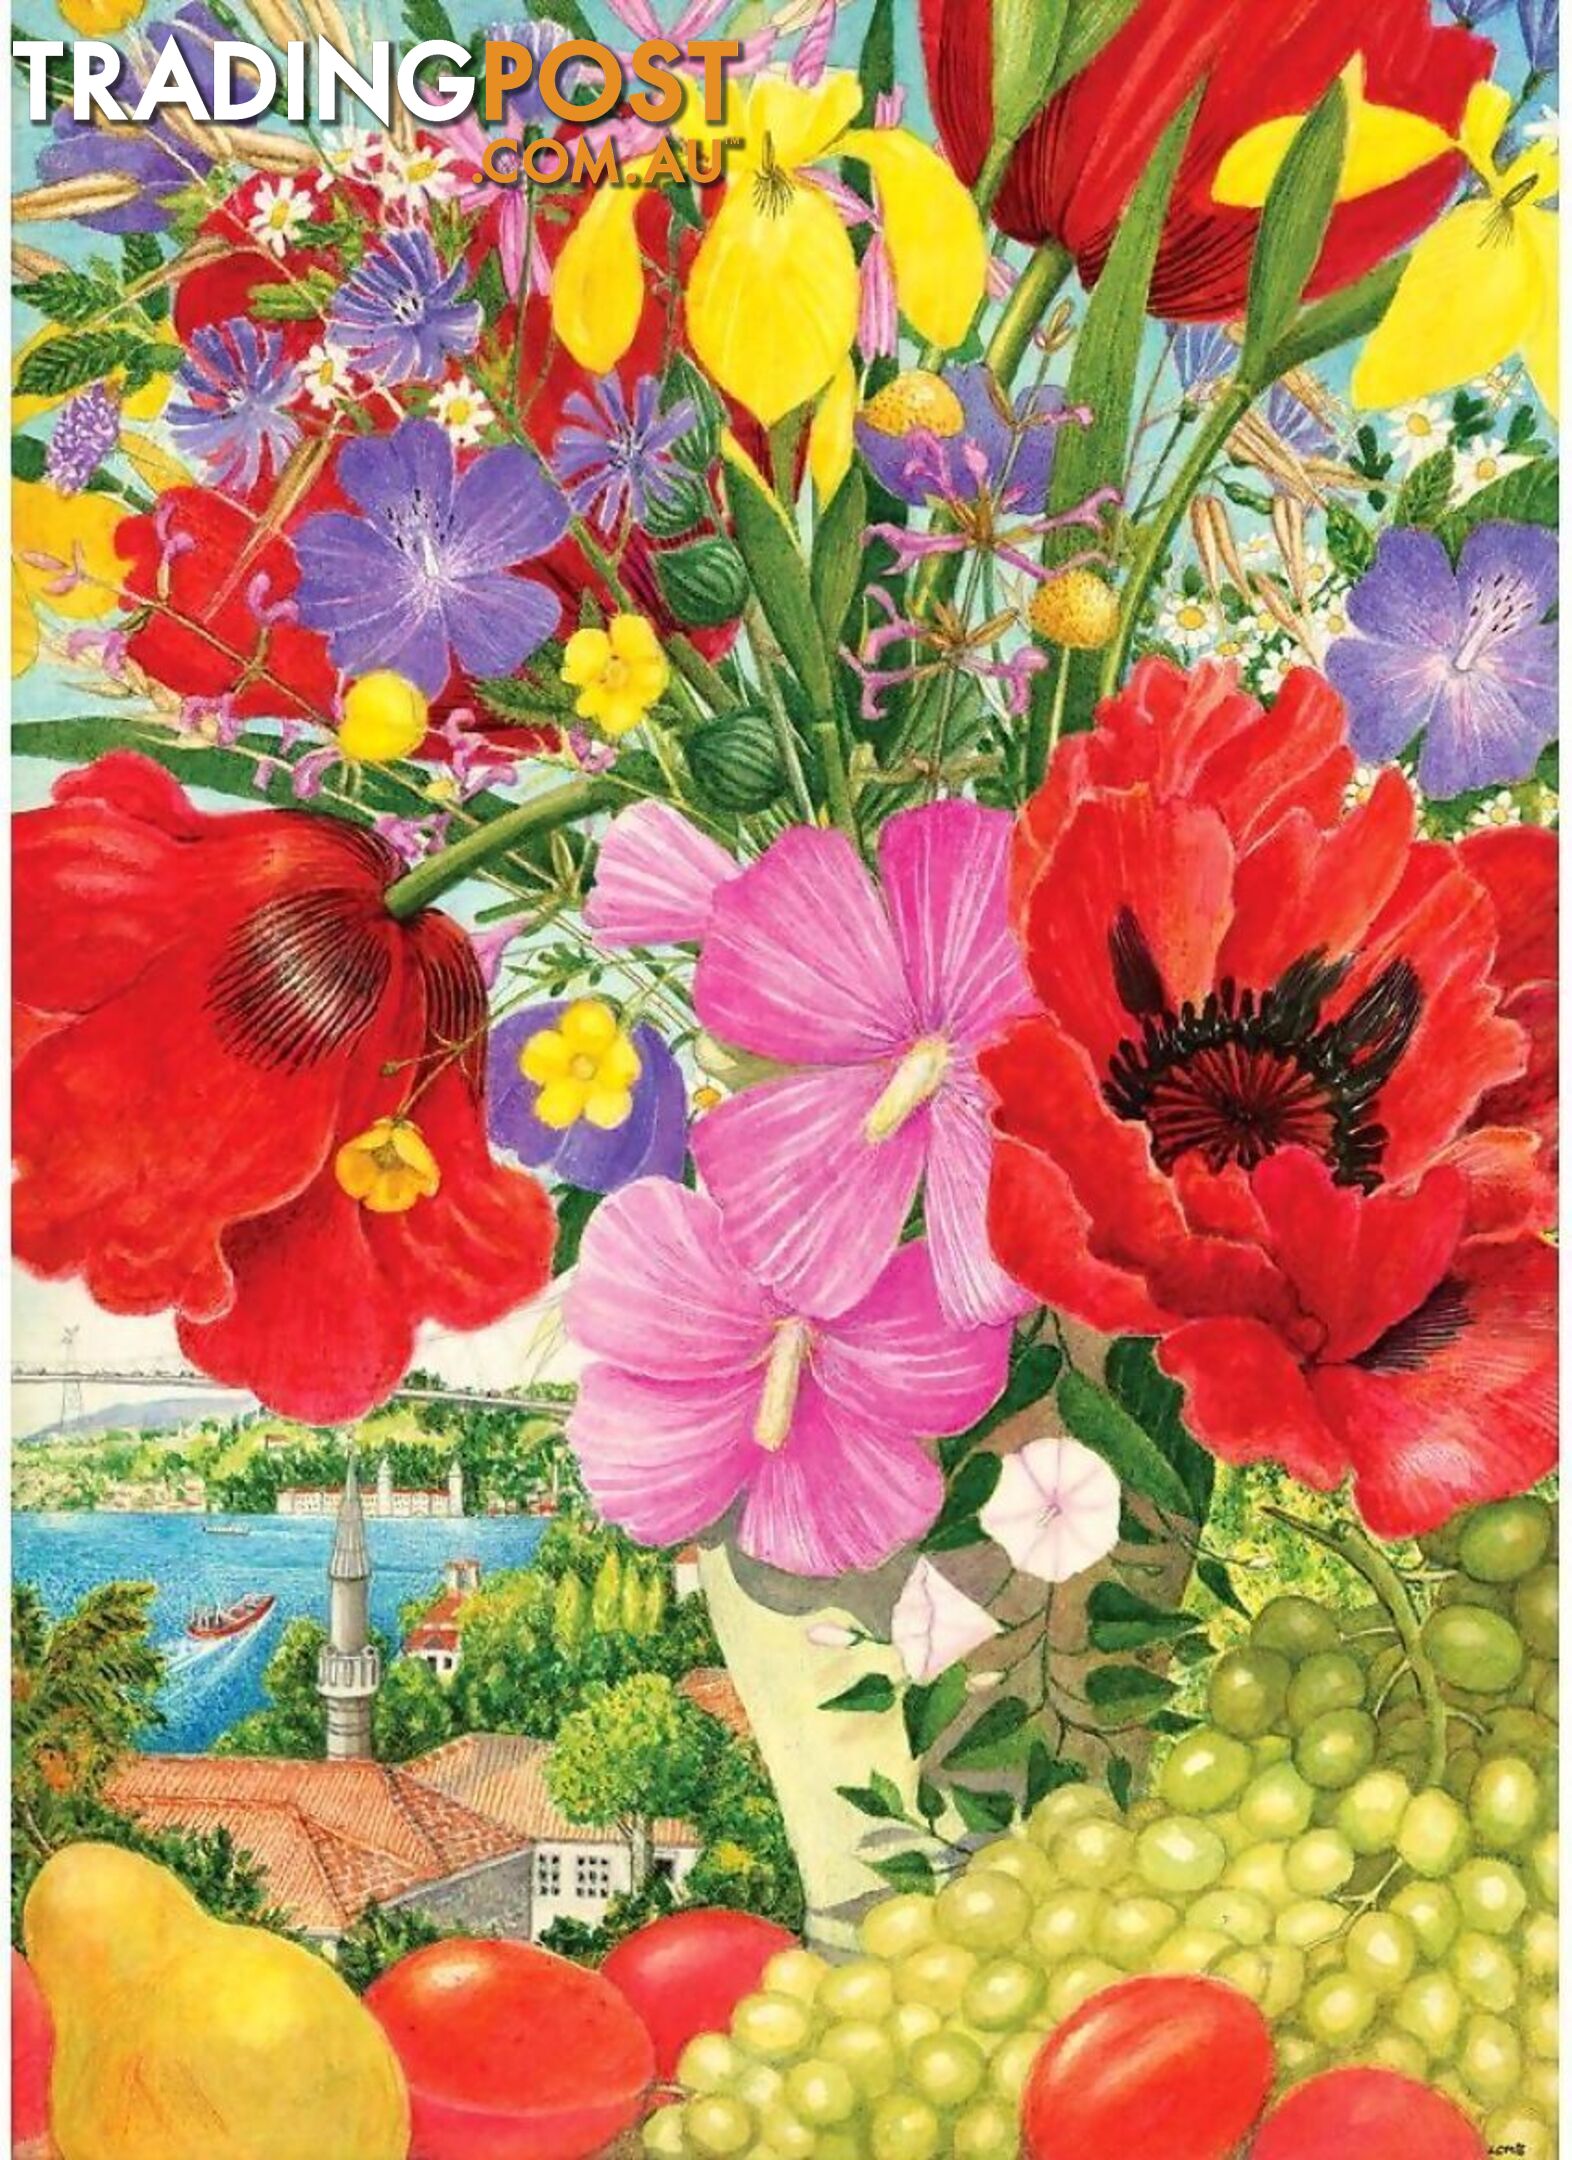 Holdson - Floral Fiesta Poppy Paradise Jigsaw Puzzle 1000 Pieces - Jdhol775576 - 9414131775576